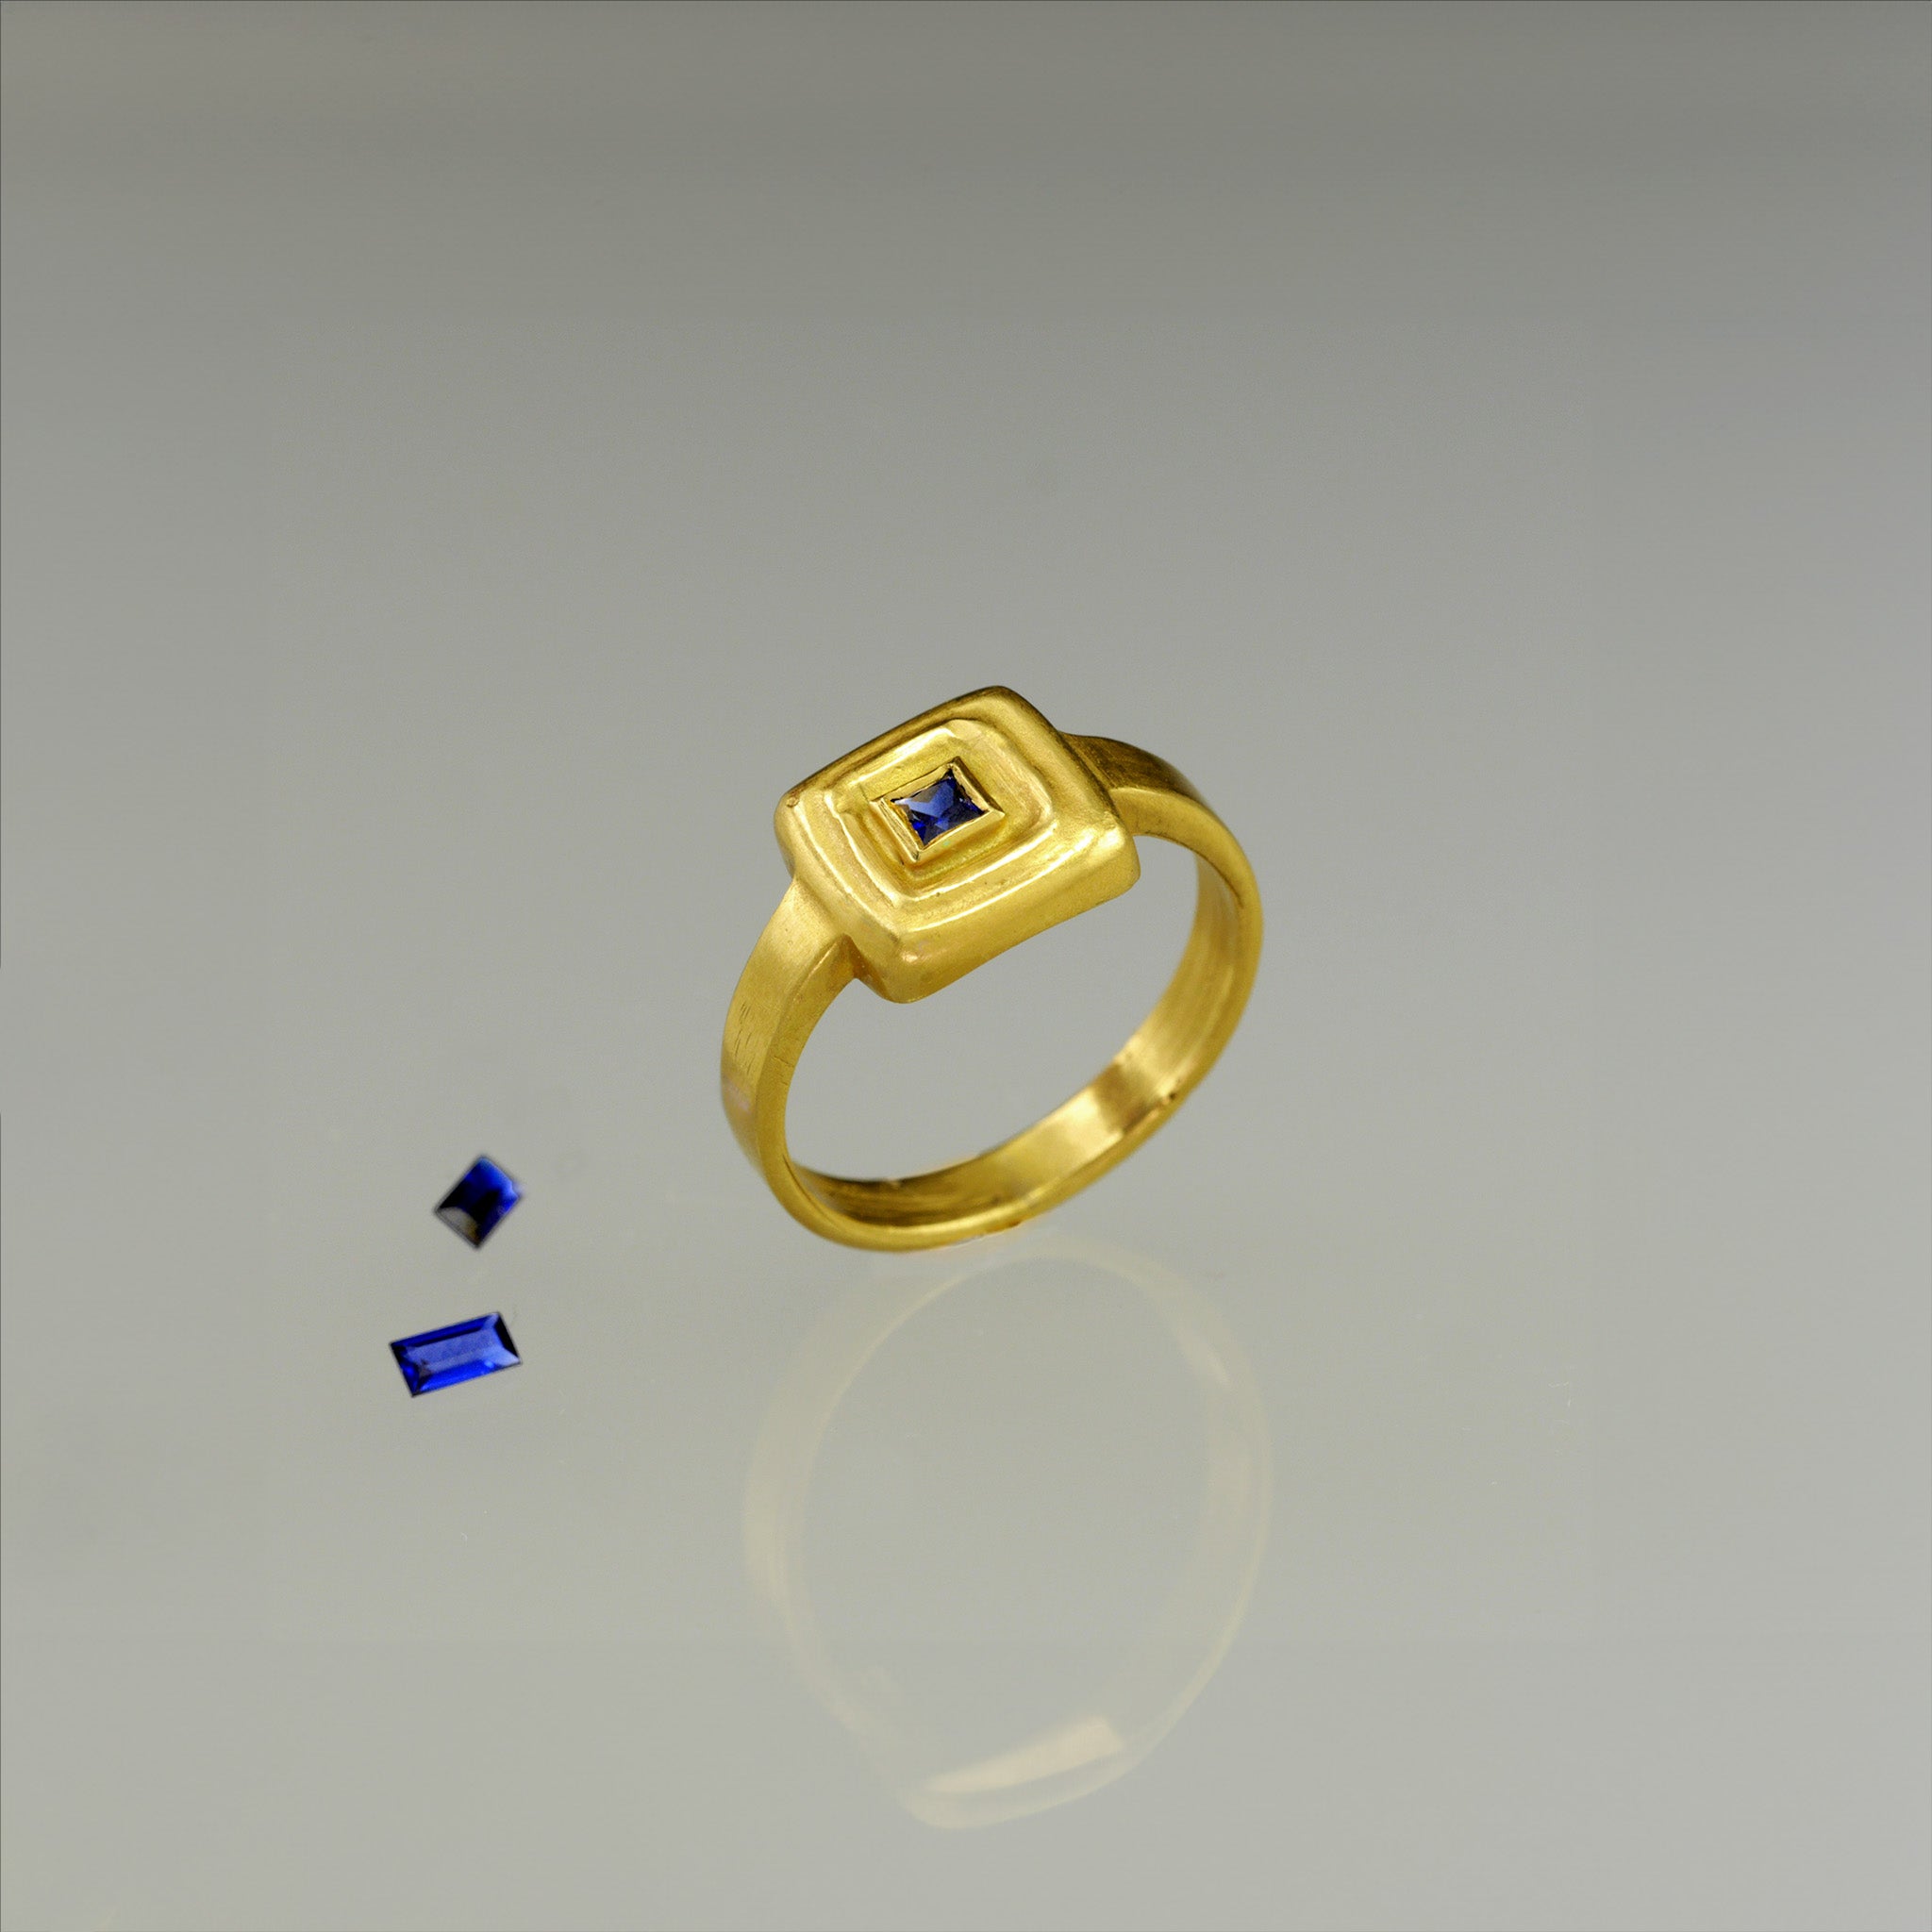 Top view of Handcrafted 18k Gold ring featuring a square Ruby set atop a square surface, evoking the ancient Egyptian era's golden jewelry of the Pharaohs.